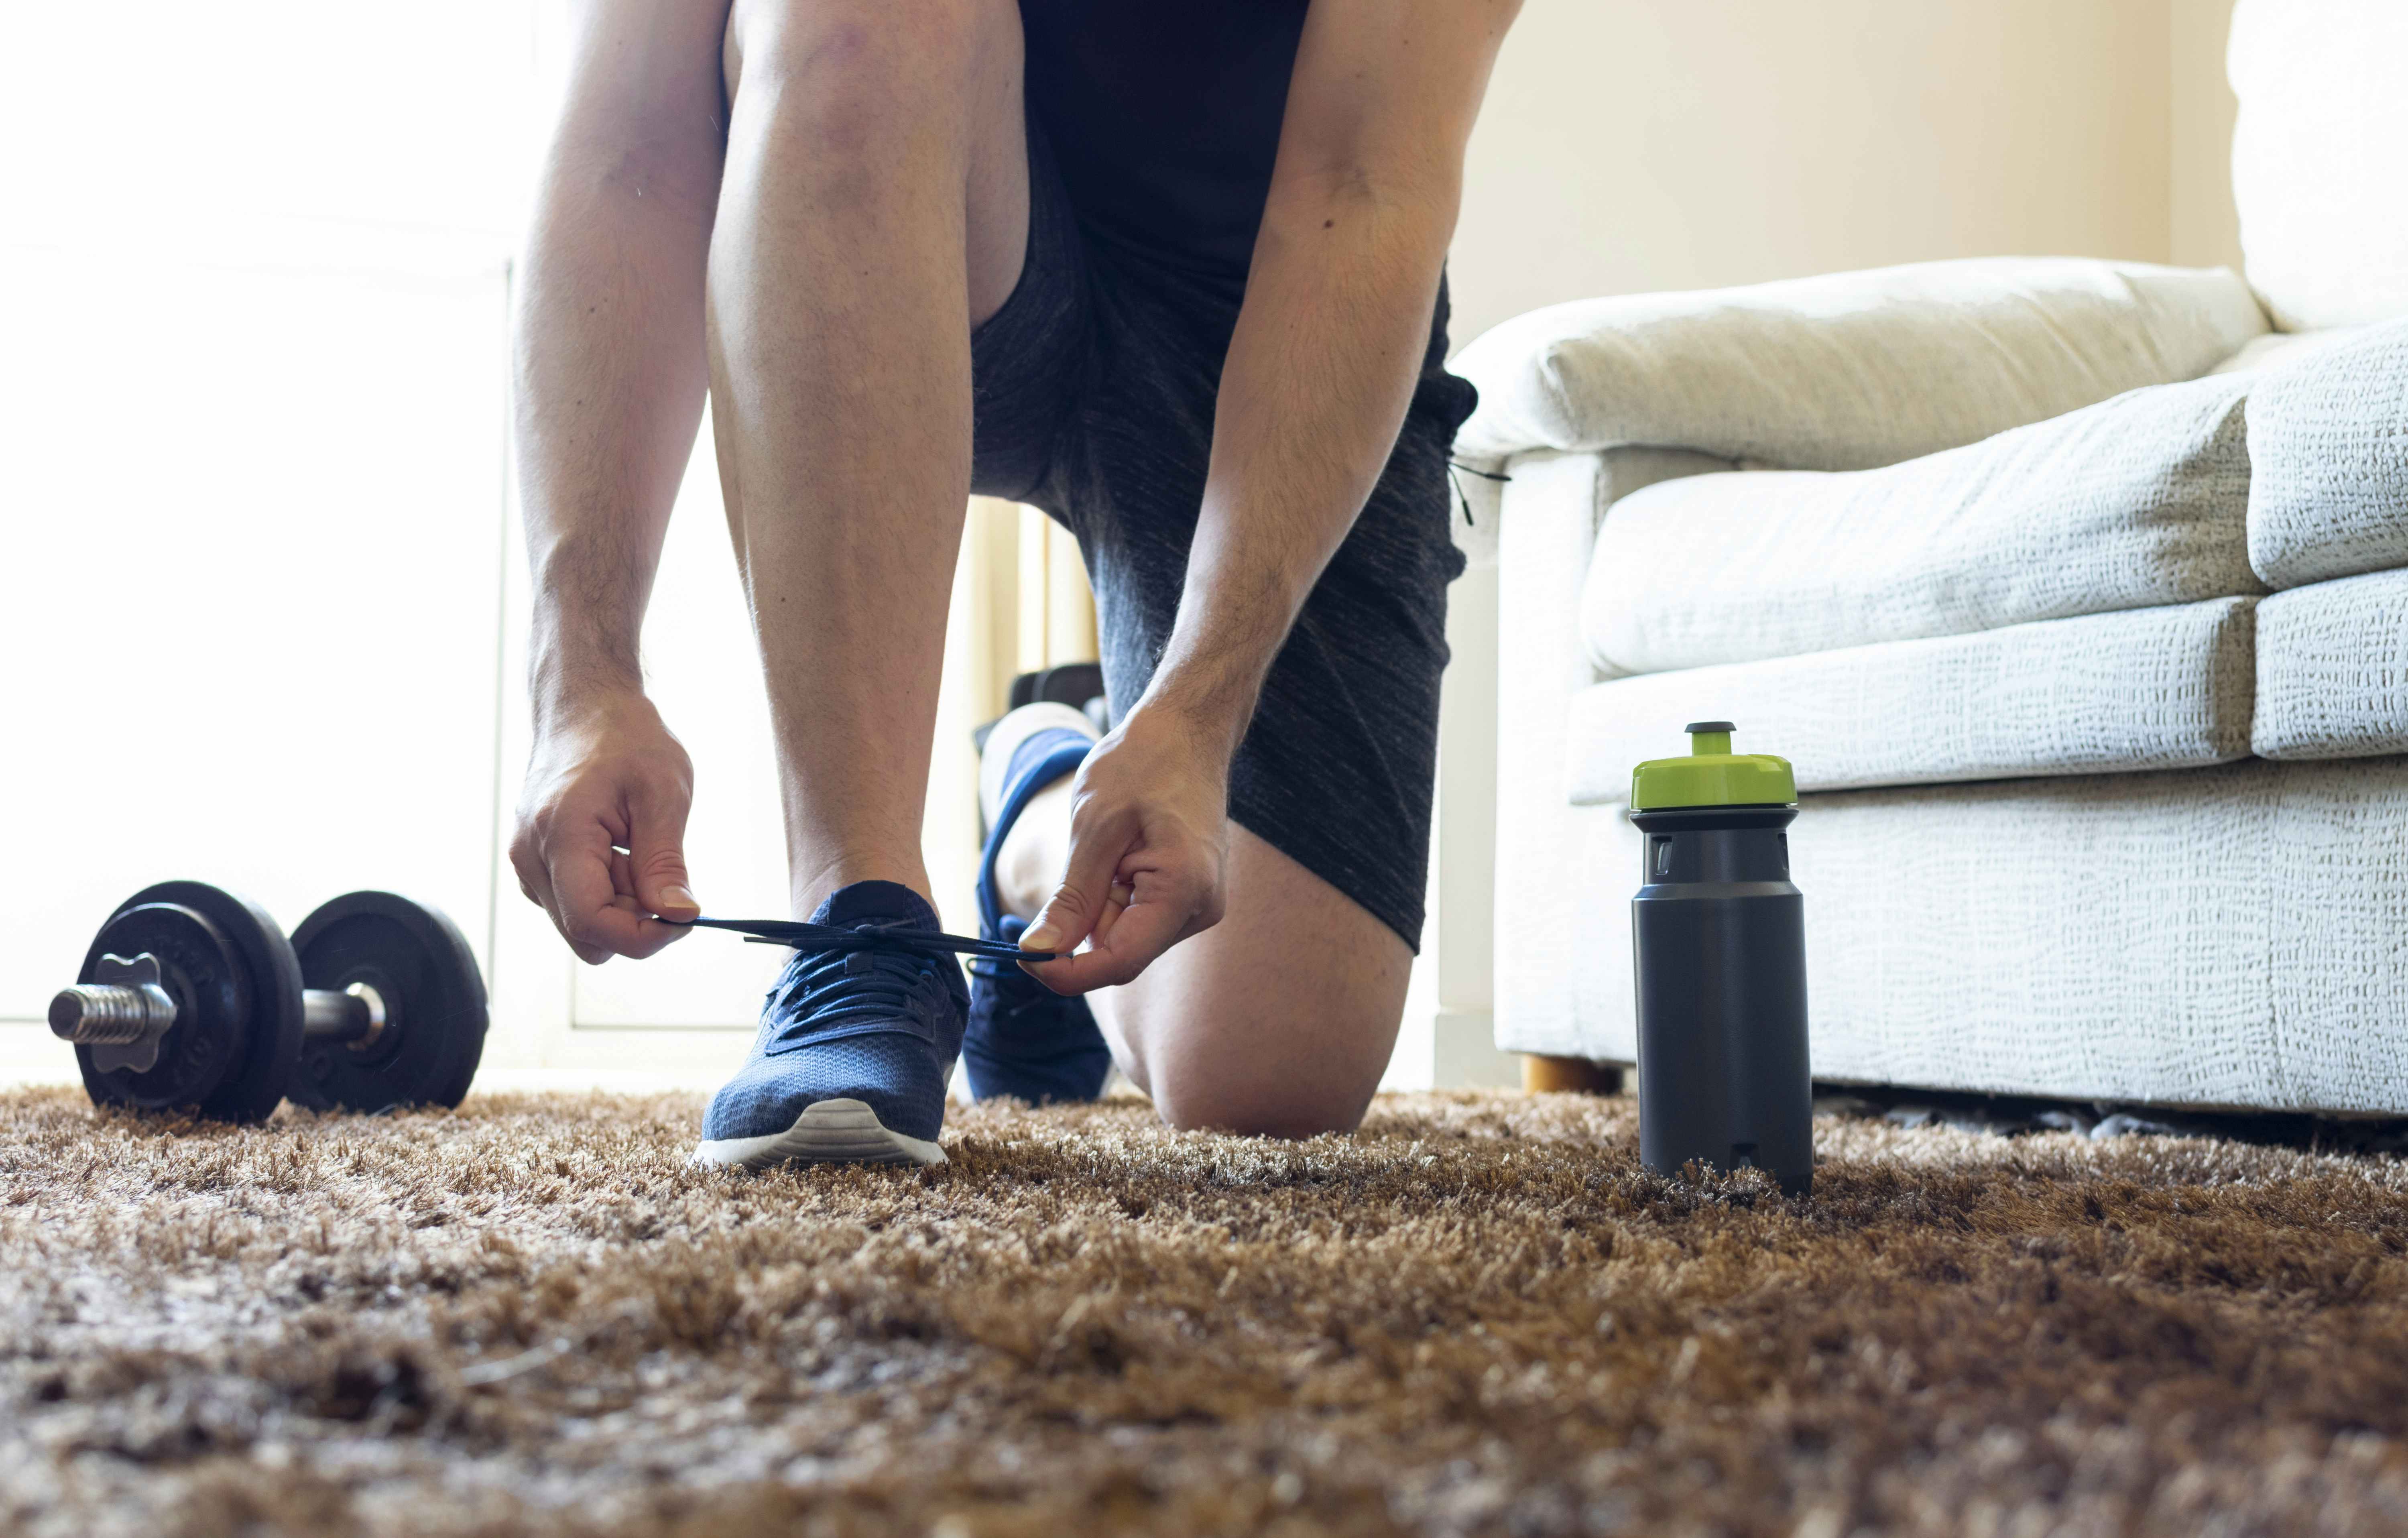 A man tying his shoe on a rug at home next to weights and a water bottle